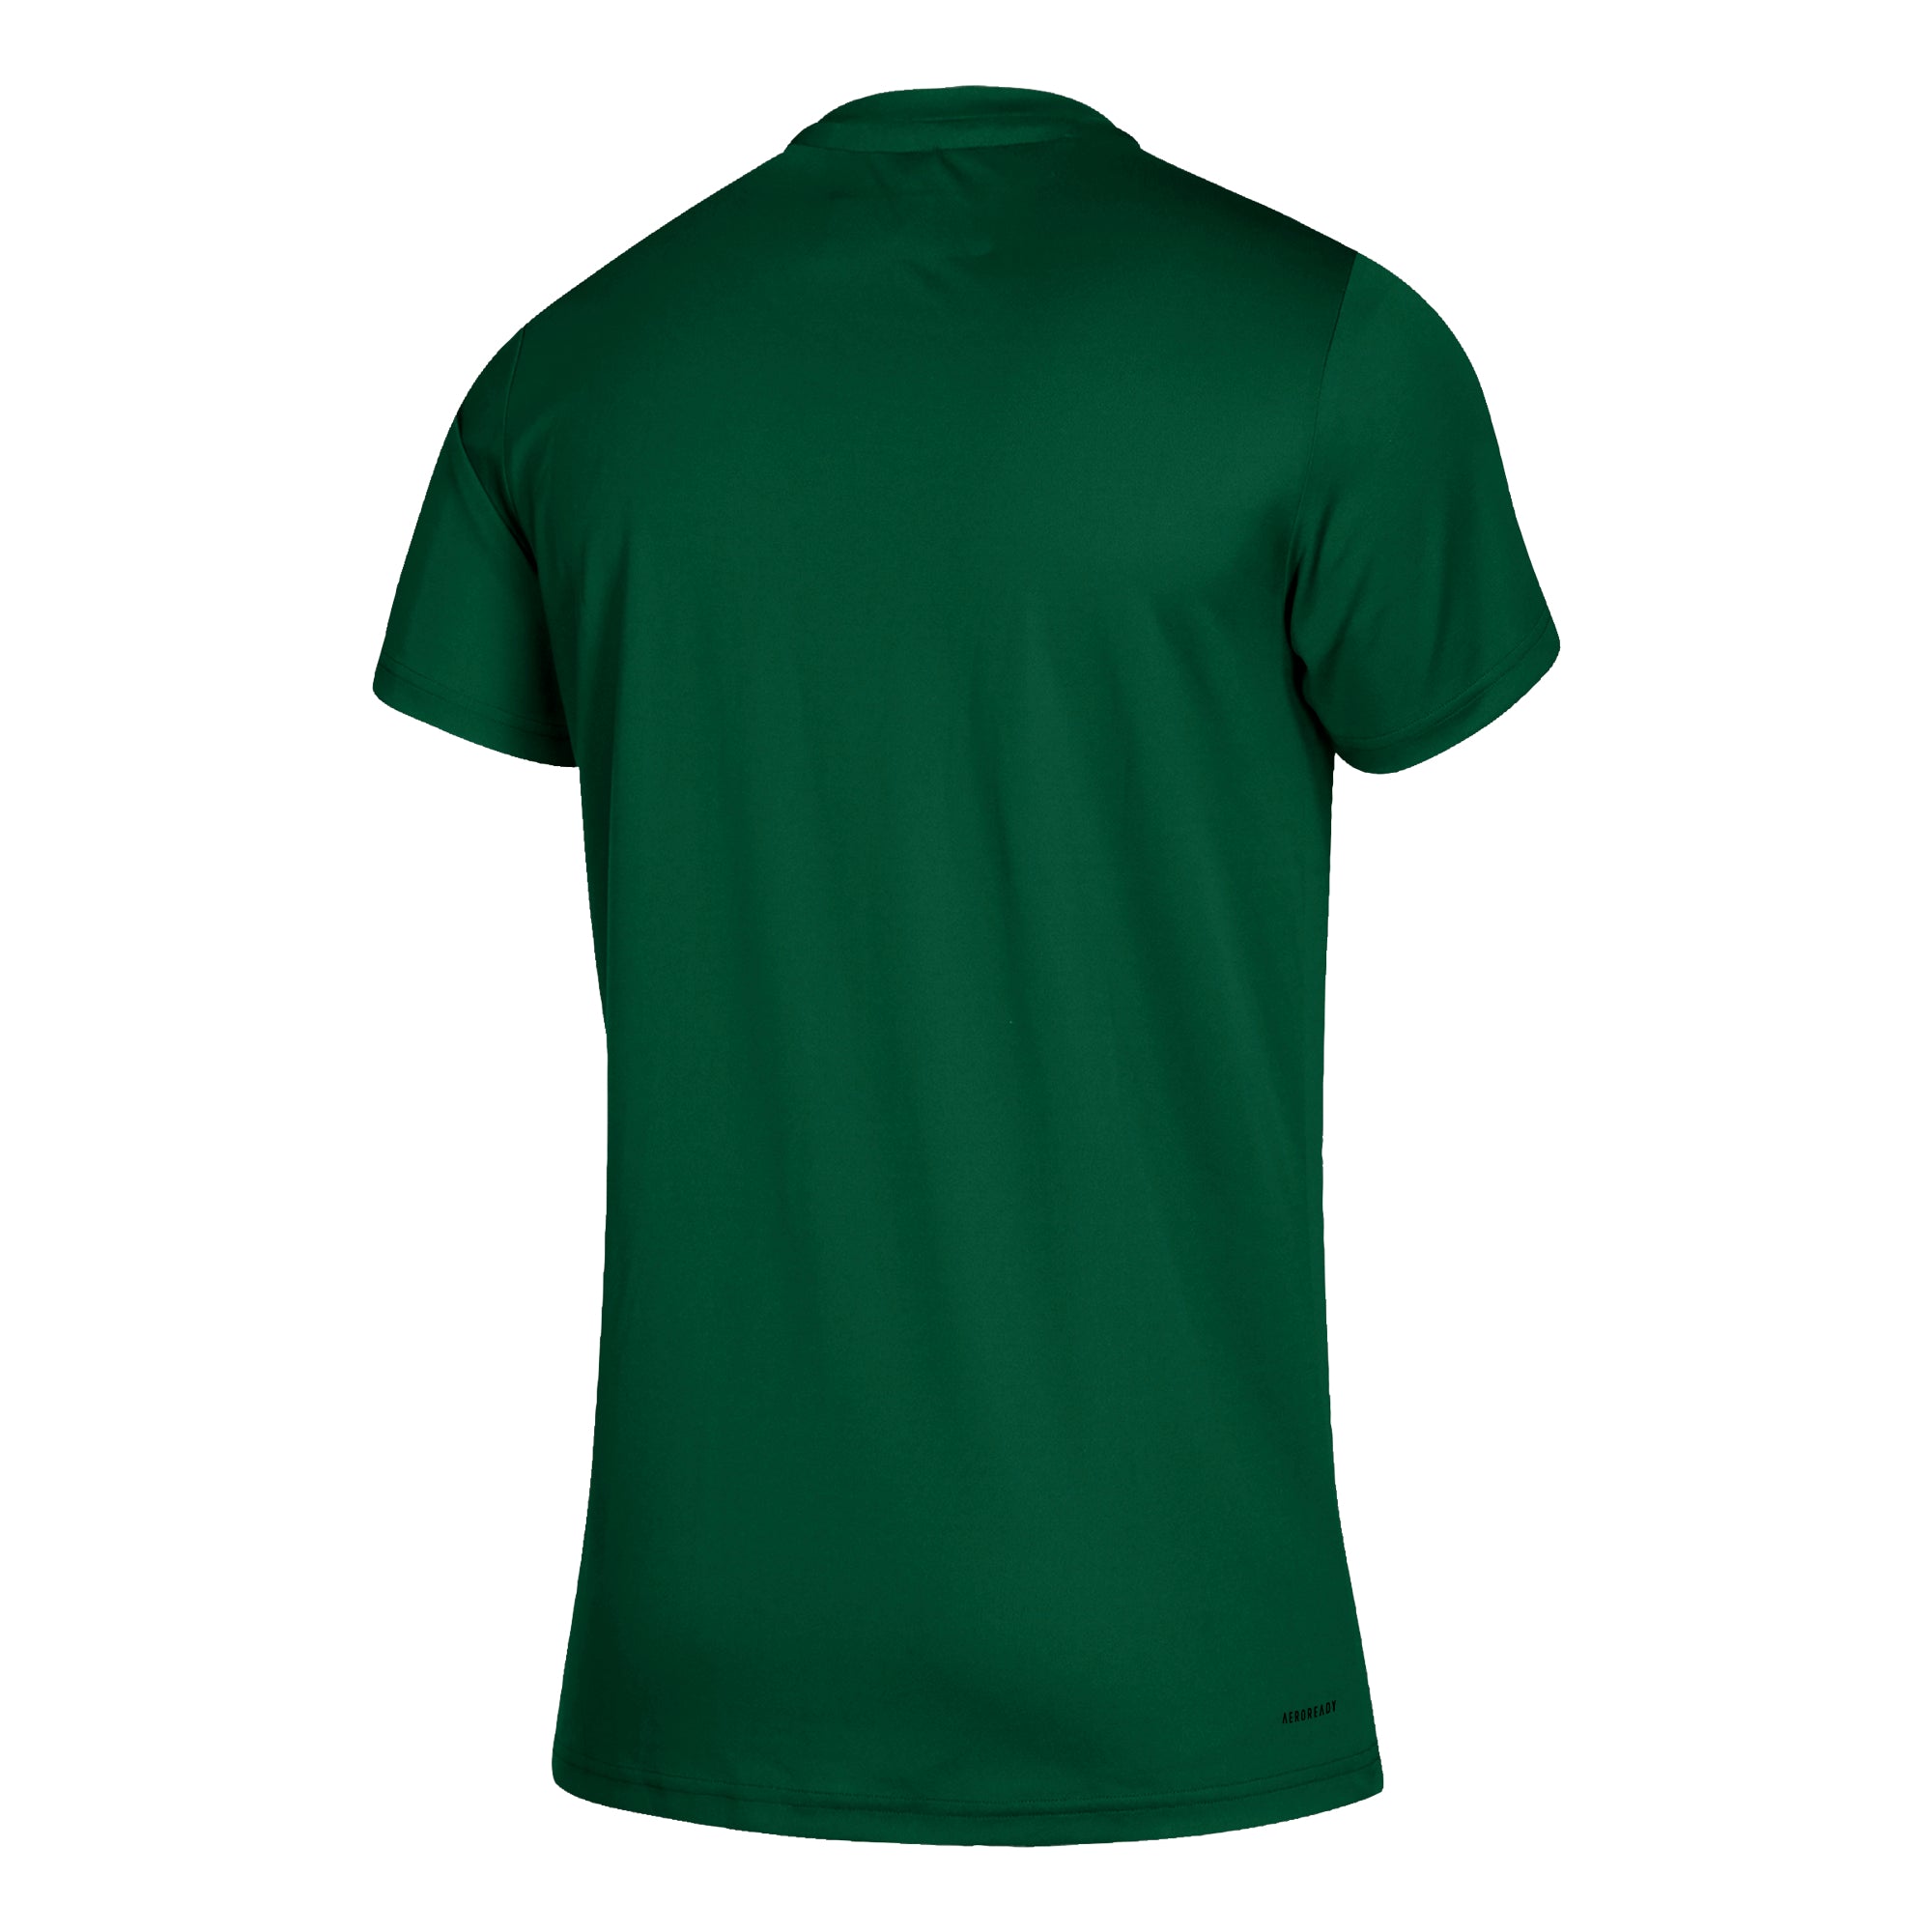 Miami Hurricanes adidas Youth CLIMATCH SS T-Shirt - Green